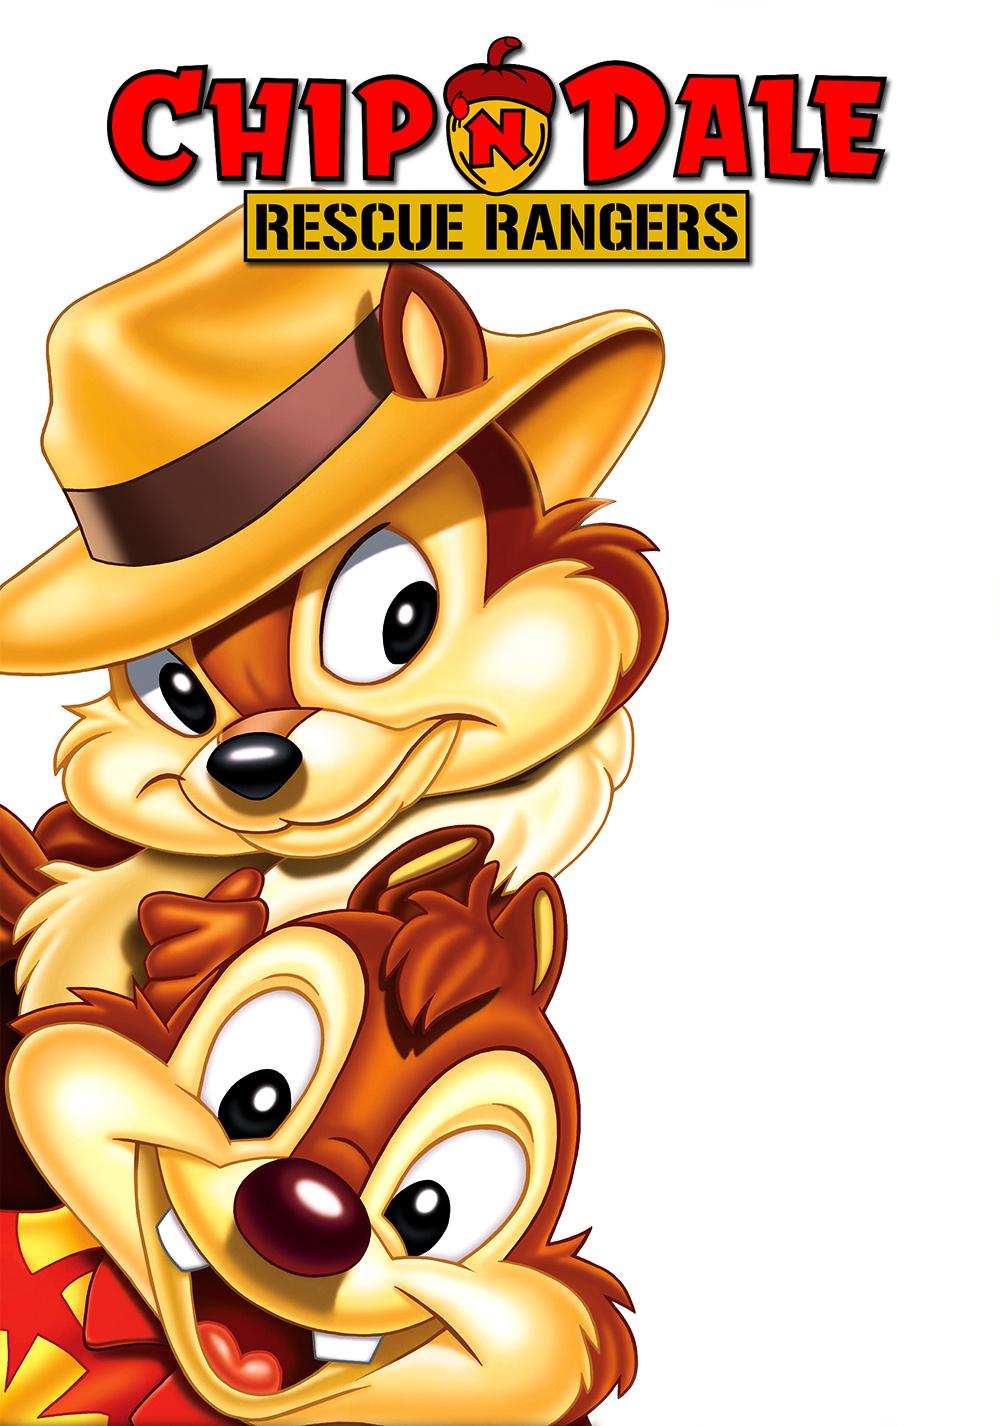 Chip And Dale Rescue Rangers Wallpaper. 96 best gadget hackwrench